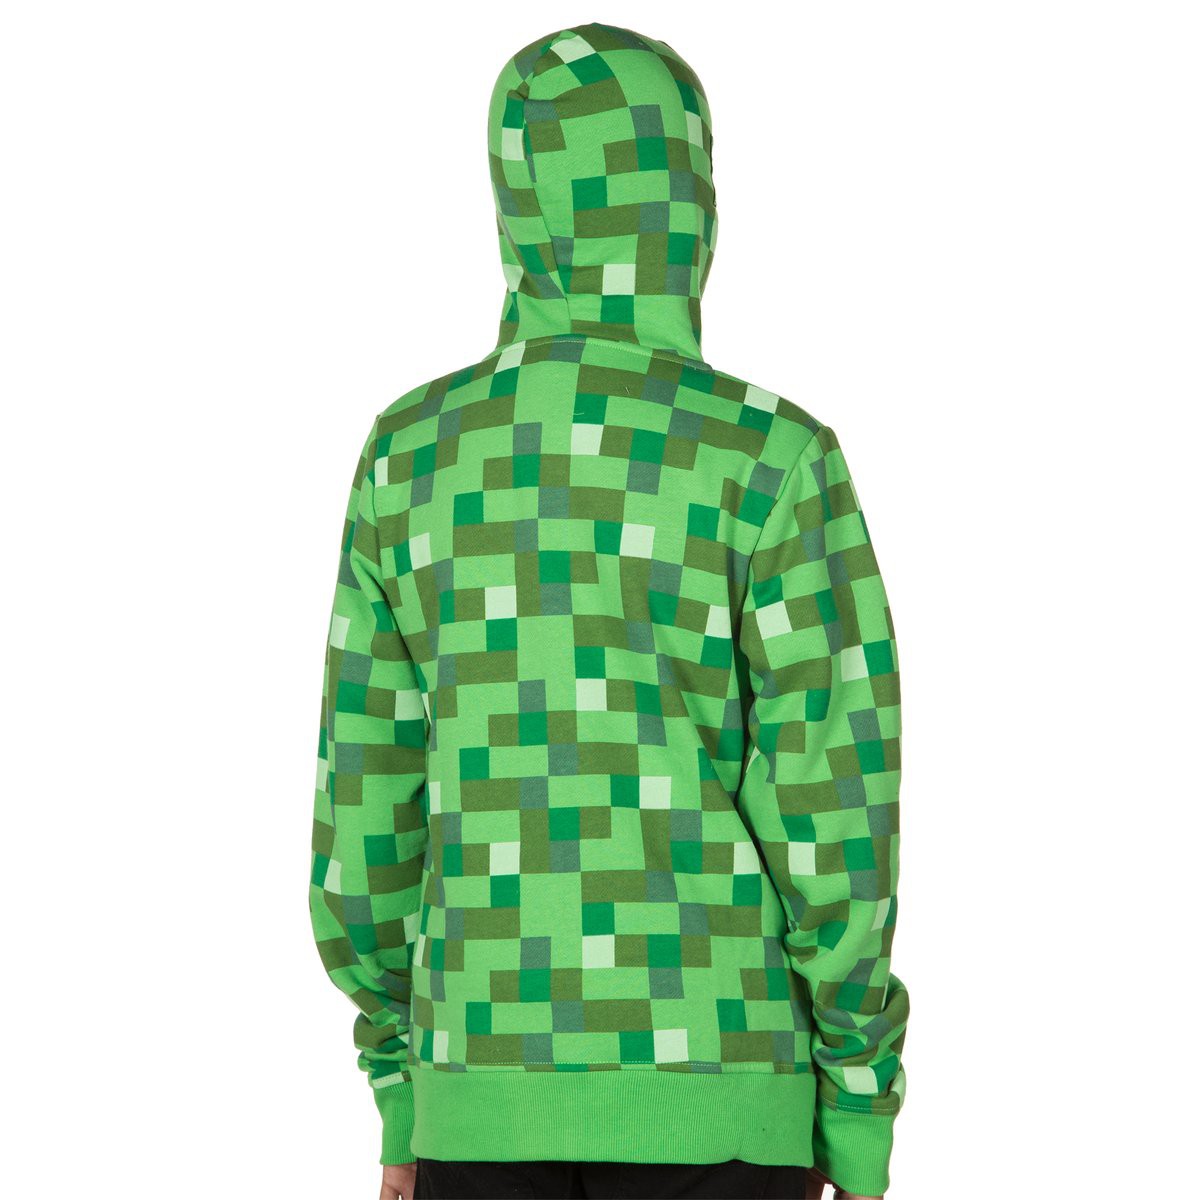 Minecraft Creeper No Face Premium Zip-Up hoodie Youth Extra Large